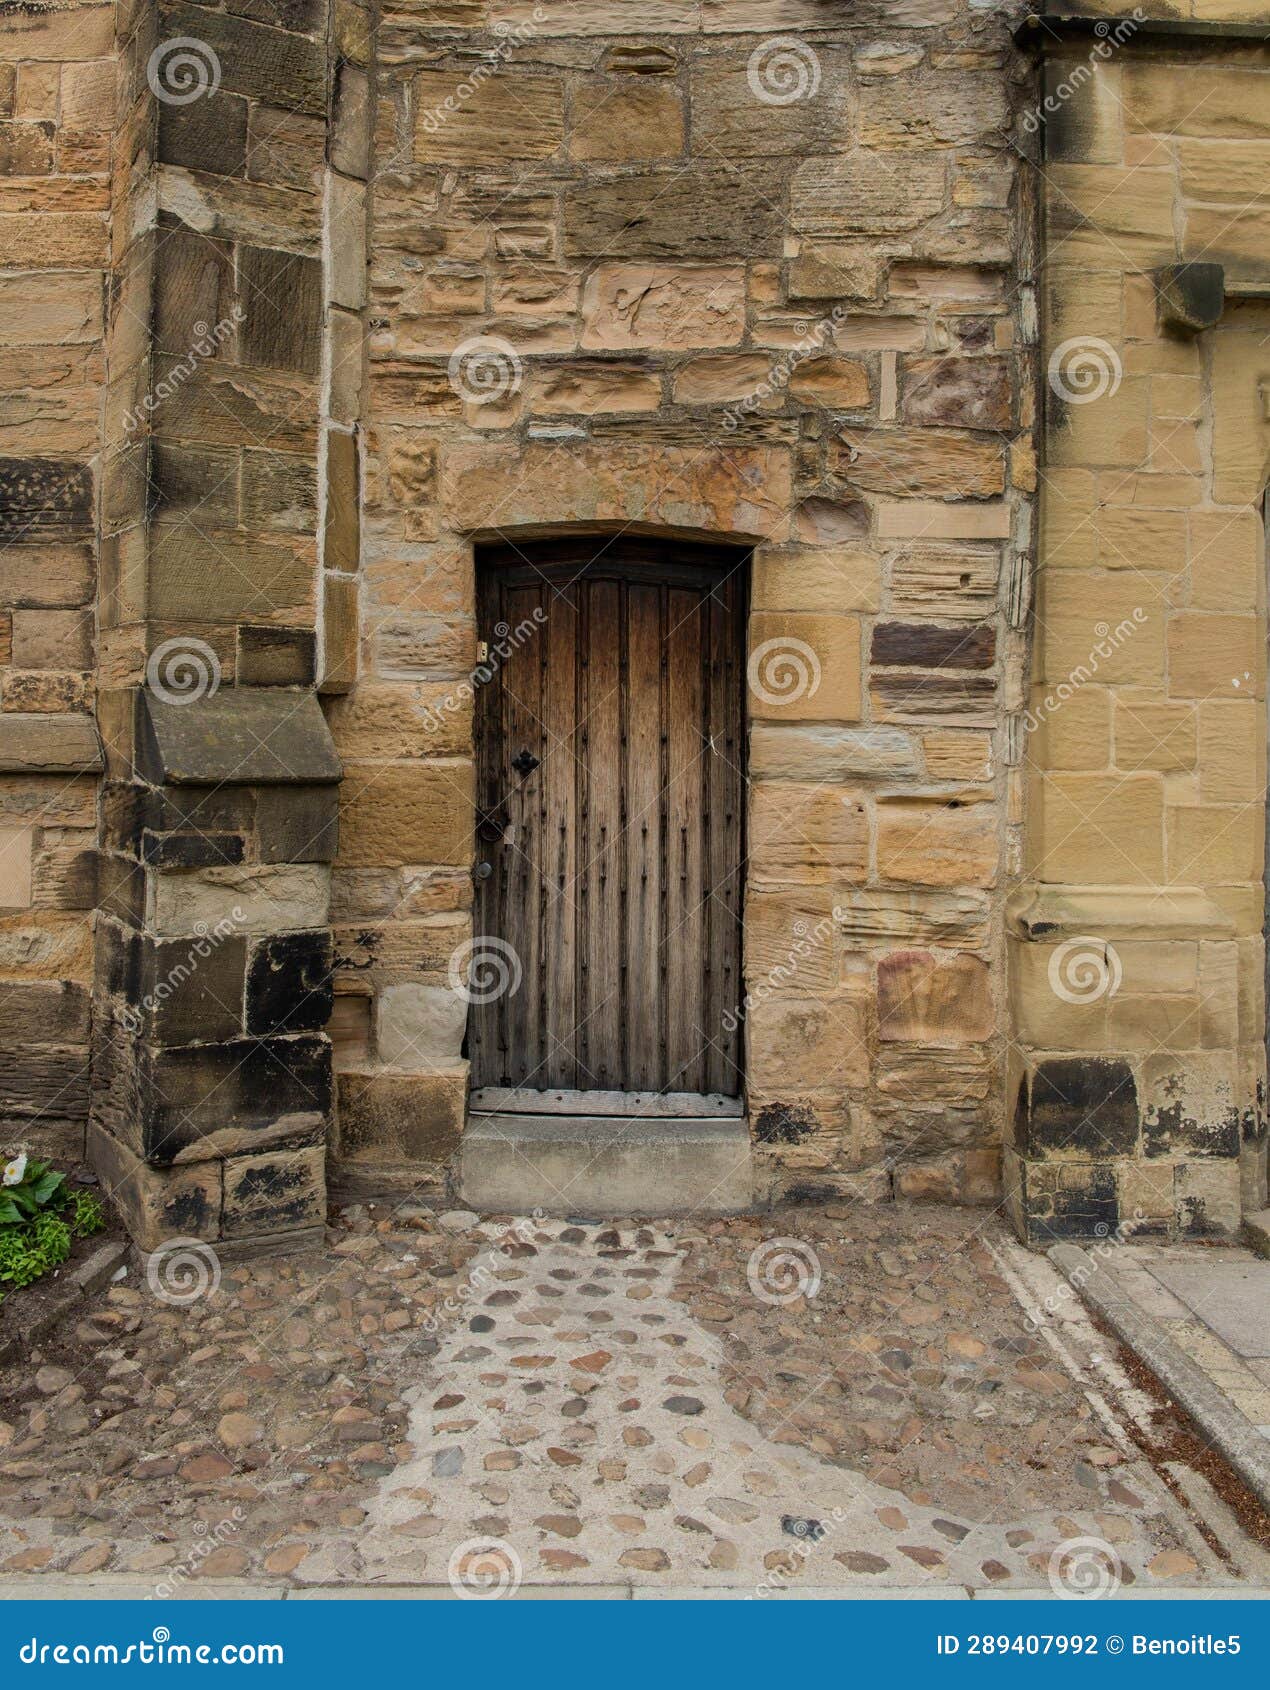 old house faÃ§ade with a wooden door in scotland